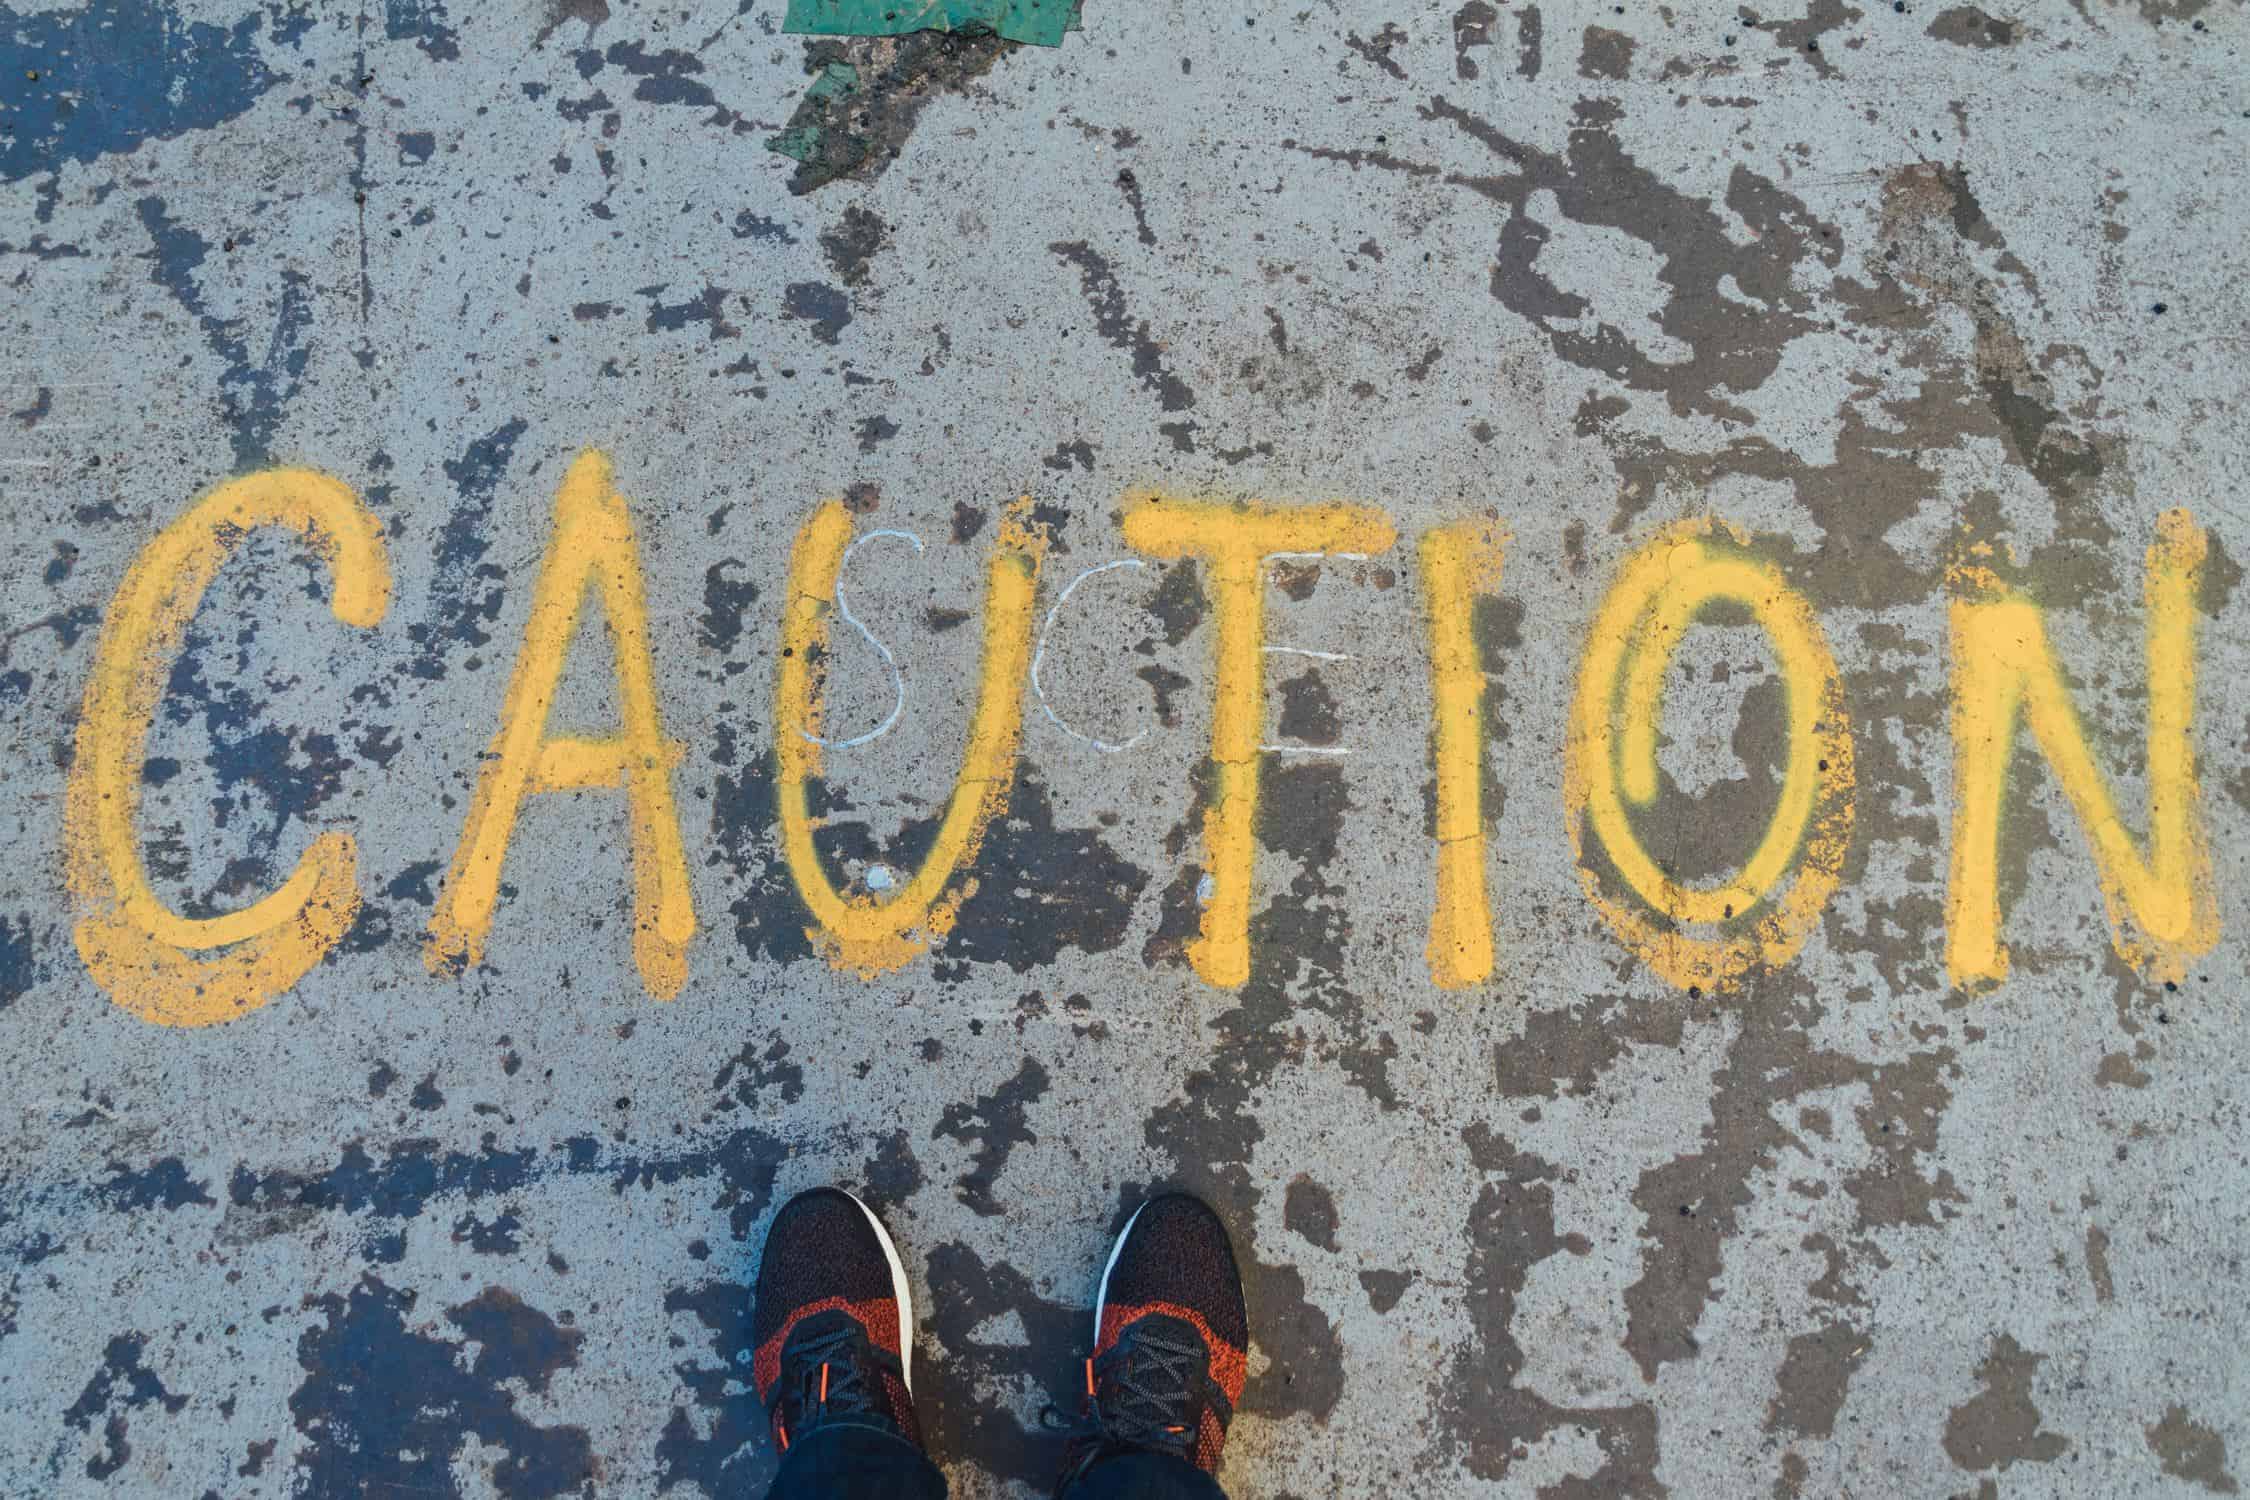 Caution written on the ground. Perspective from above. Shoes standing beside "caution"